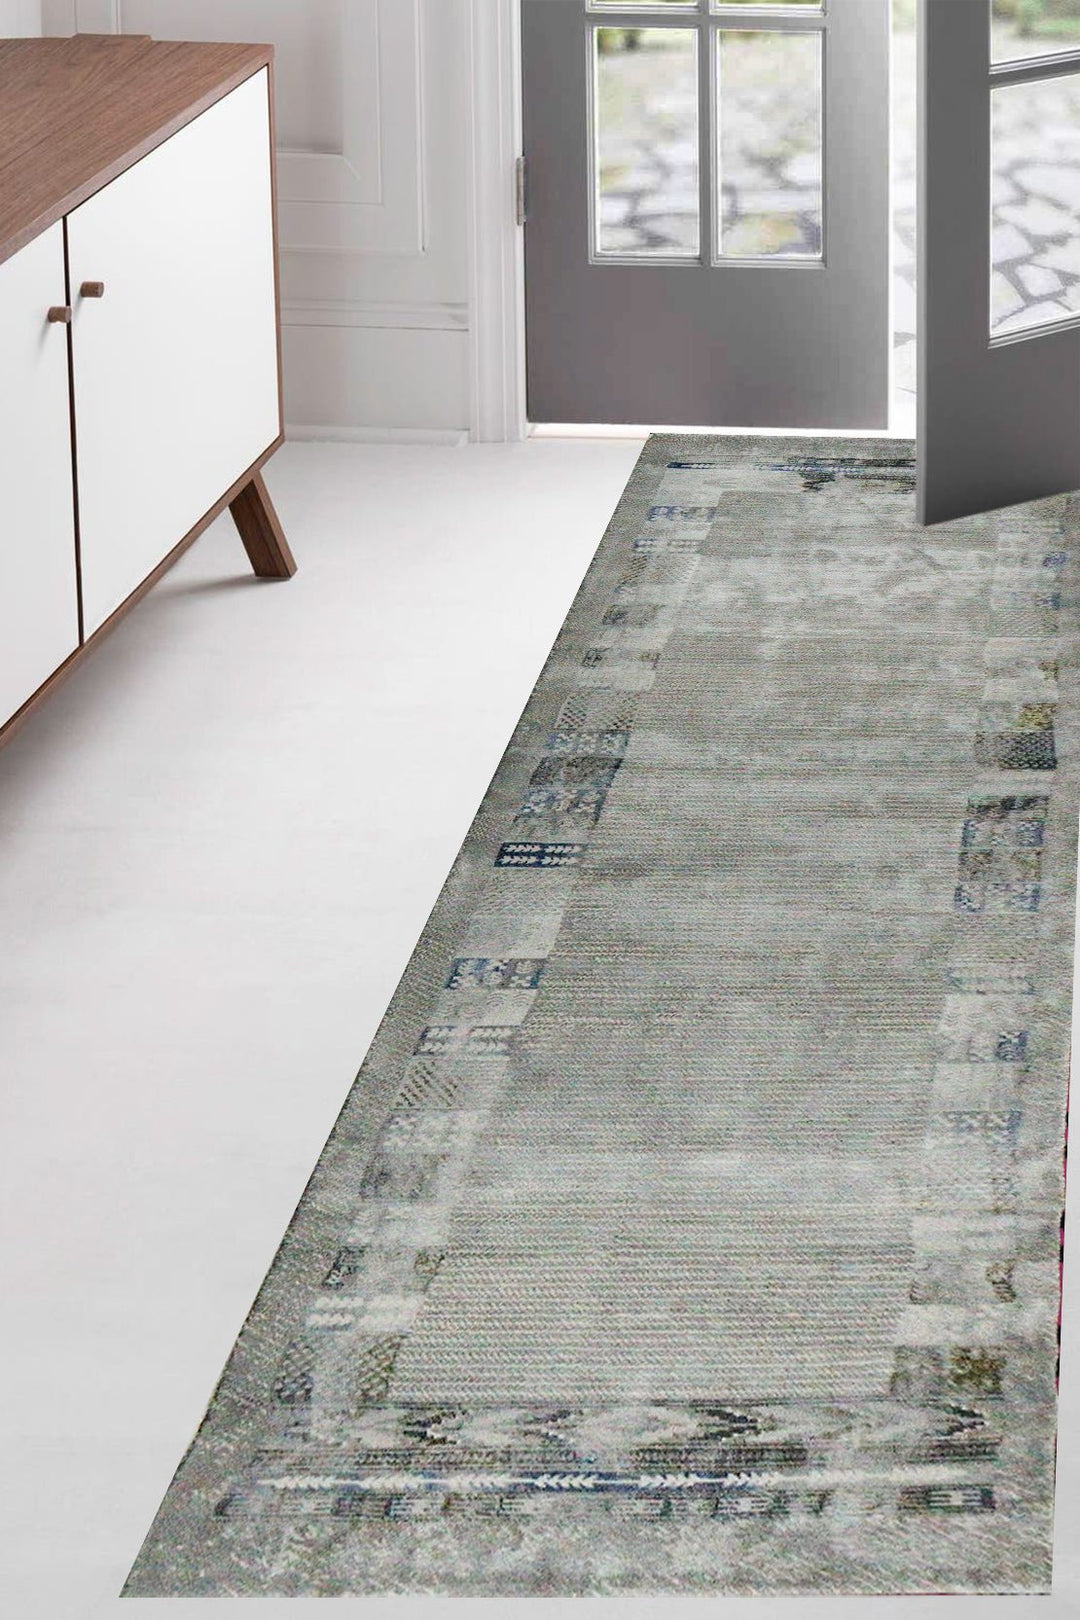 Turkish Modern Festival 1 Rug - 3.2 x 9.8 FT - Gray - Sleek and Minimalist for Chic Interiors - V Surfaces